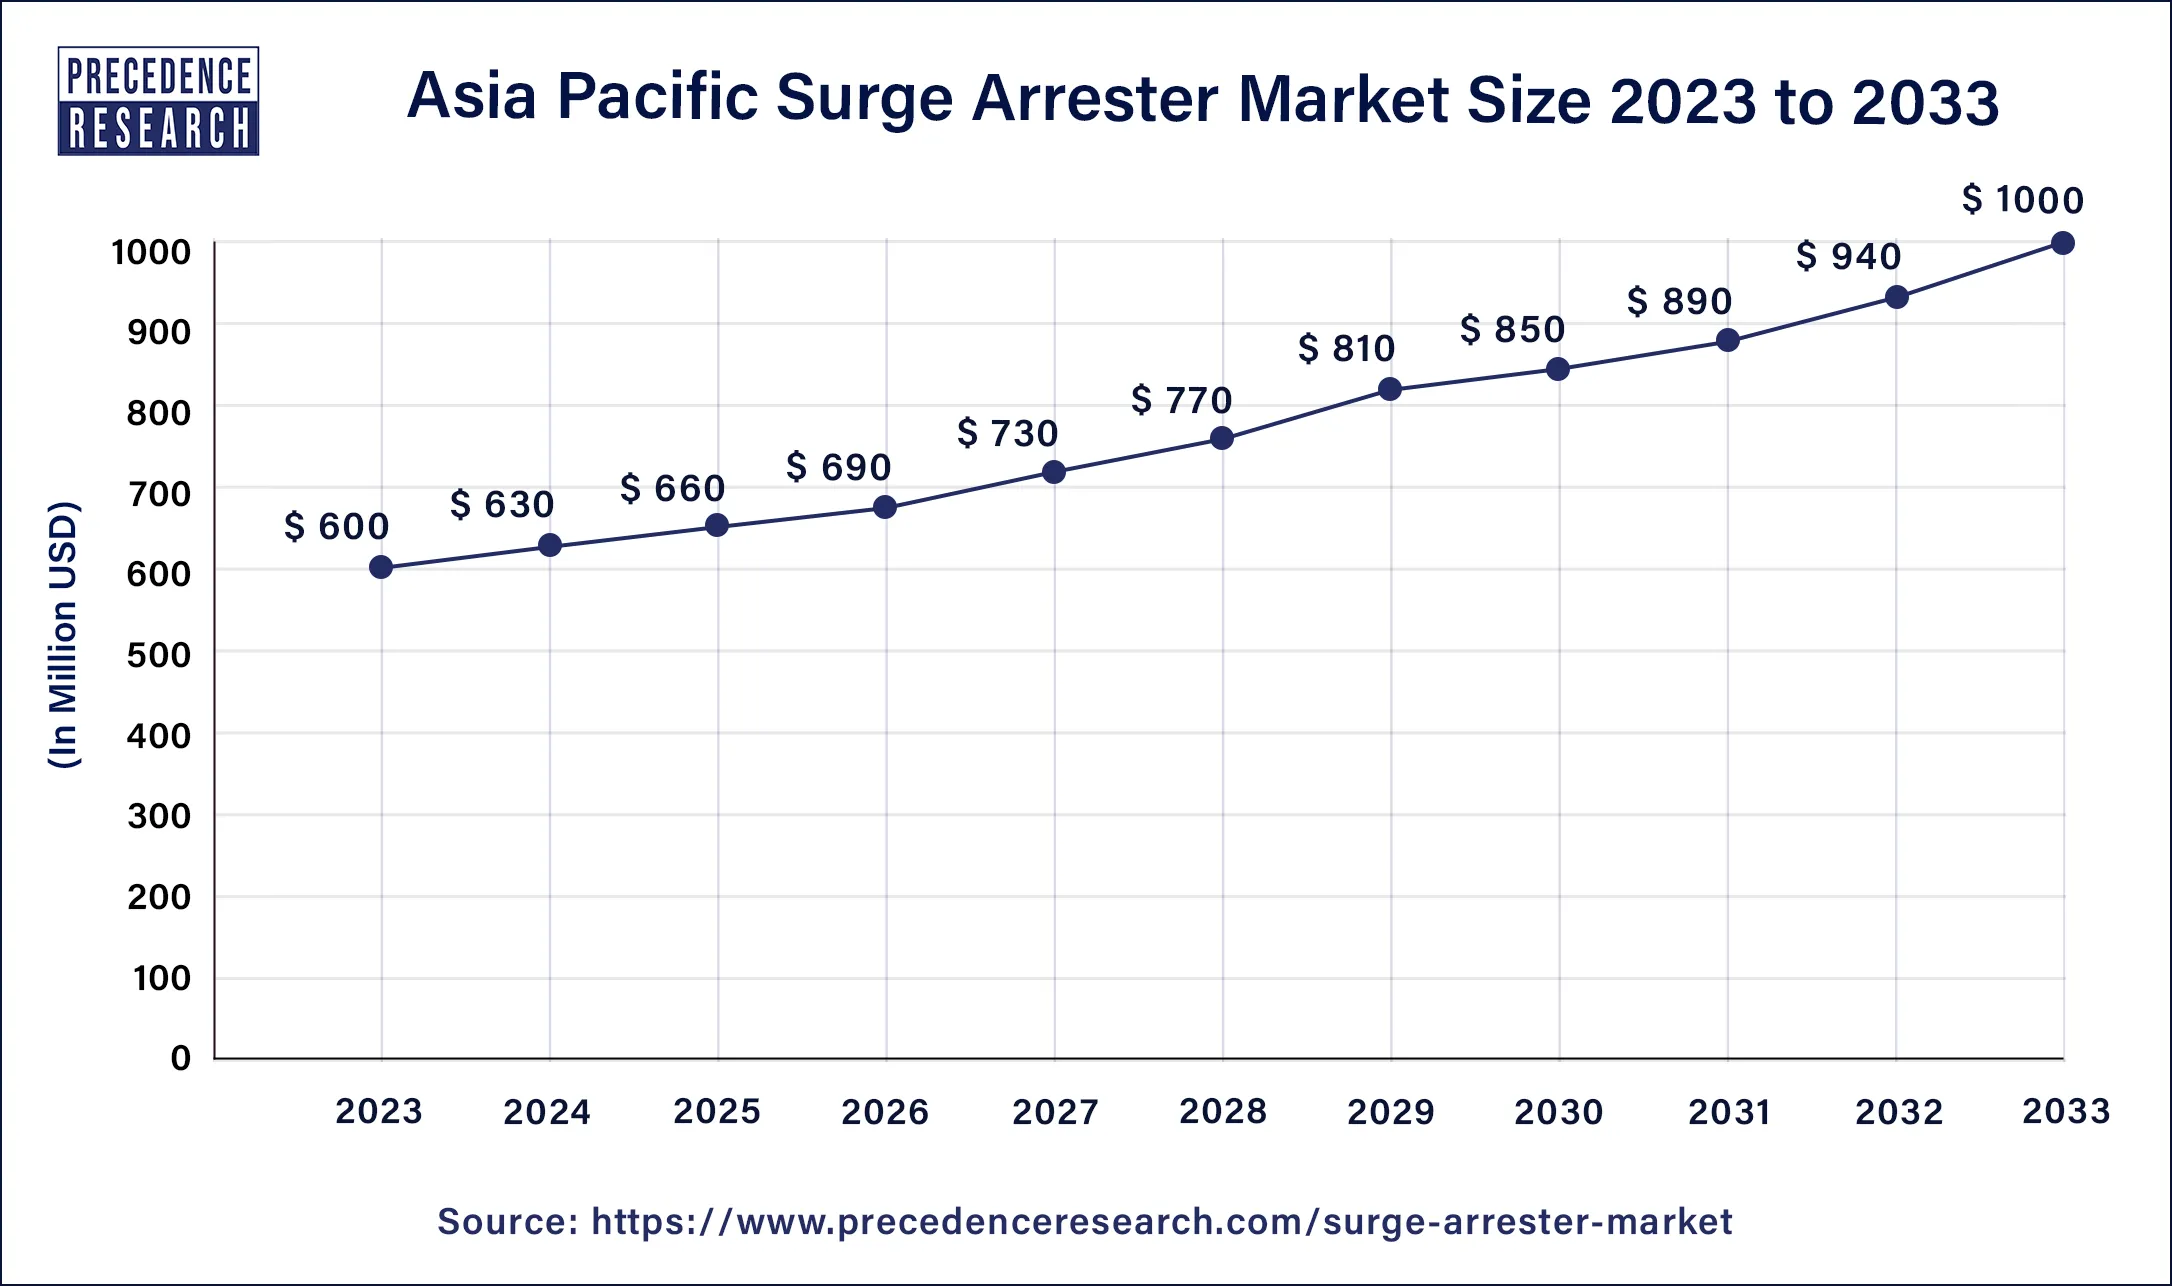 Asia Pacific Surge Arrester Market Size 2024 to 2033